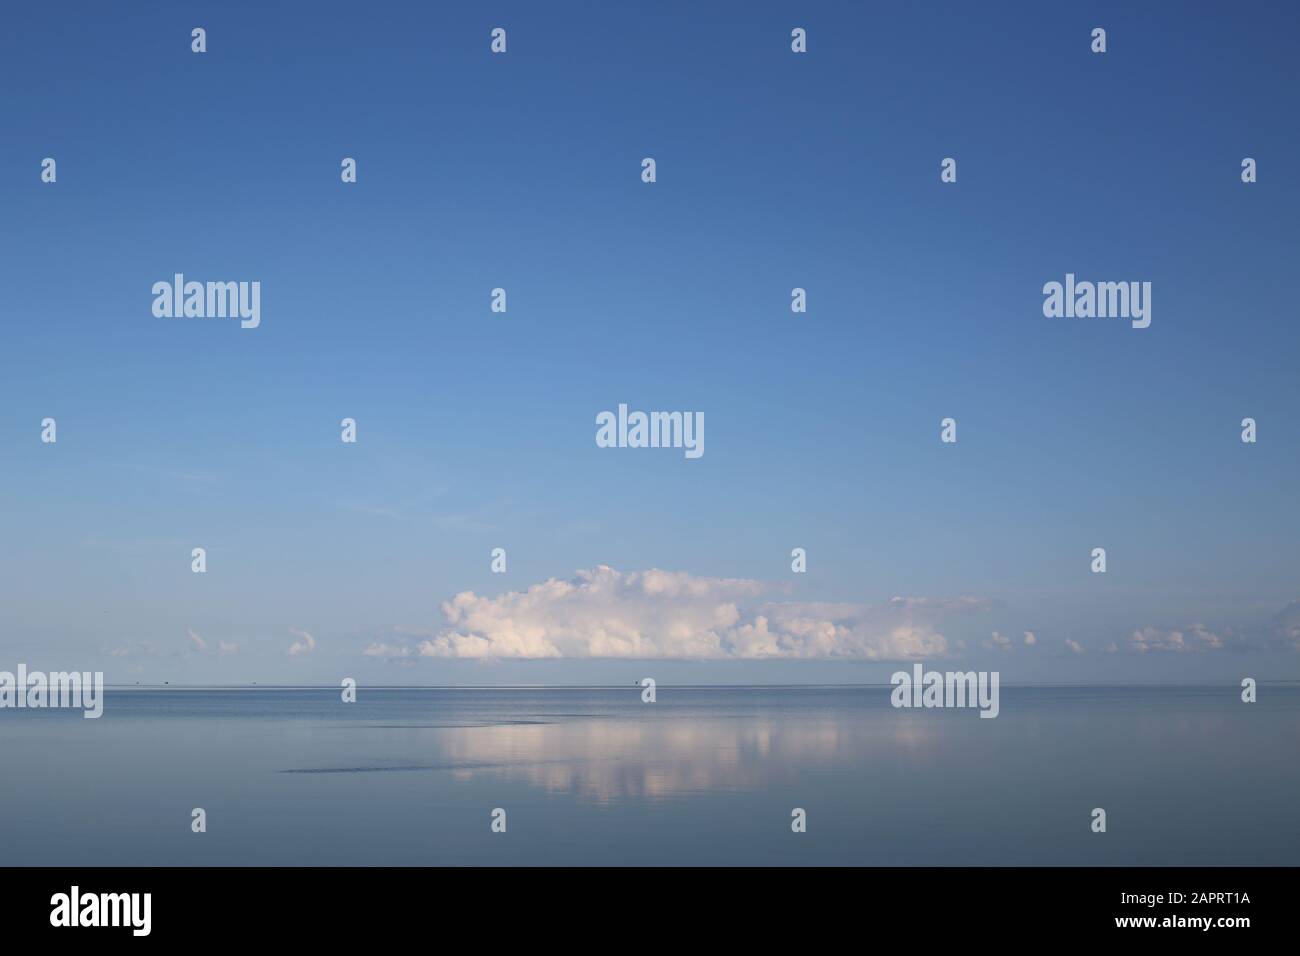 Calm Ocean Sound With Low Clouds On A Clear Morning Stock Photo